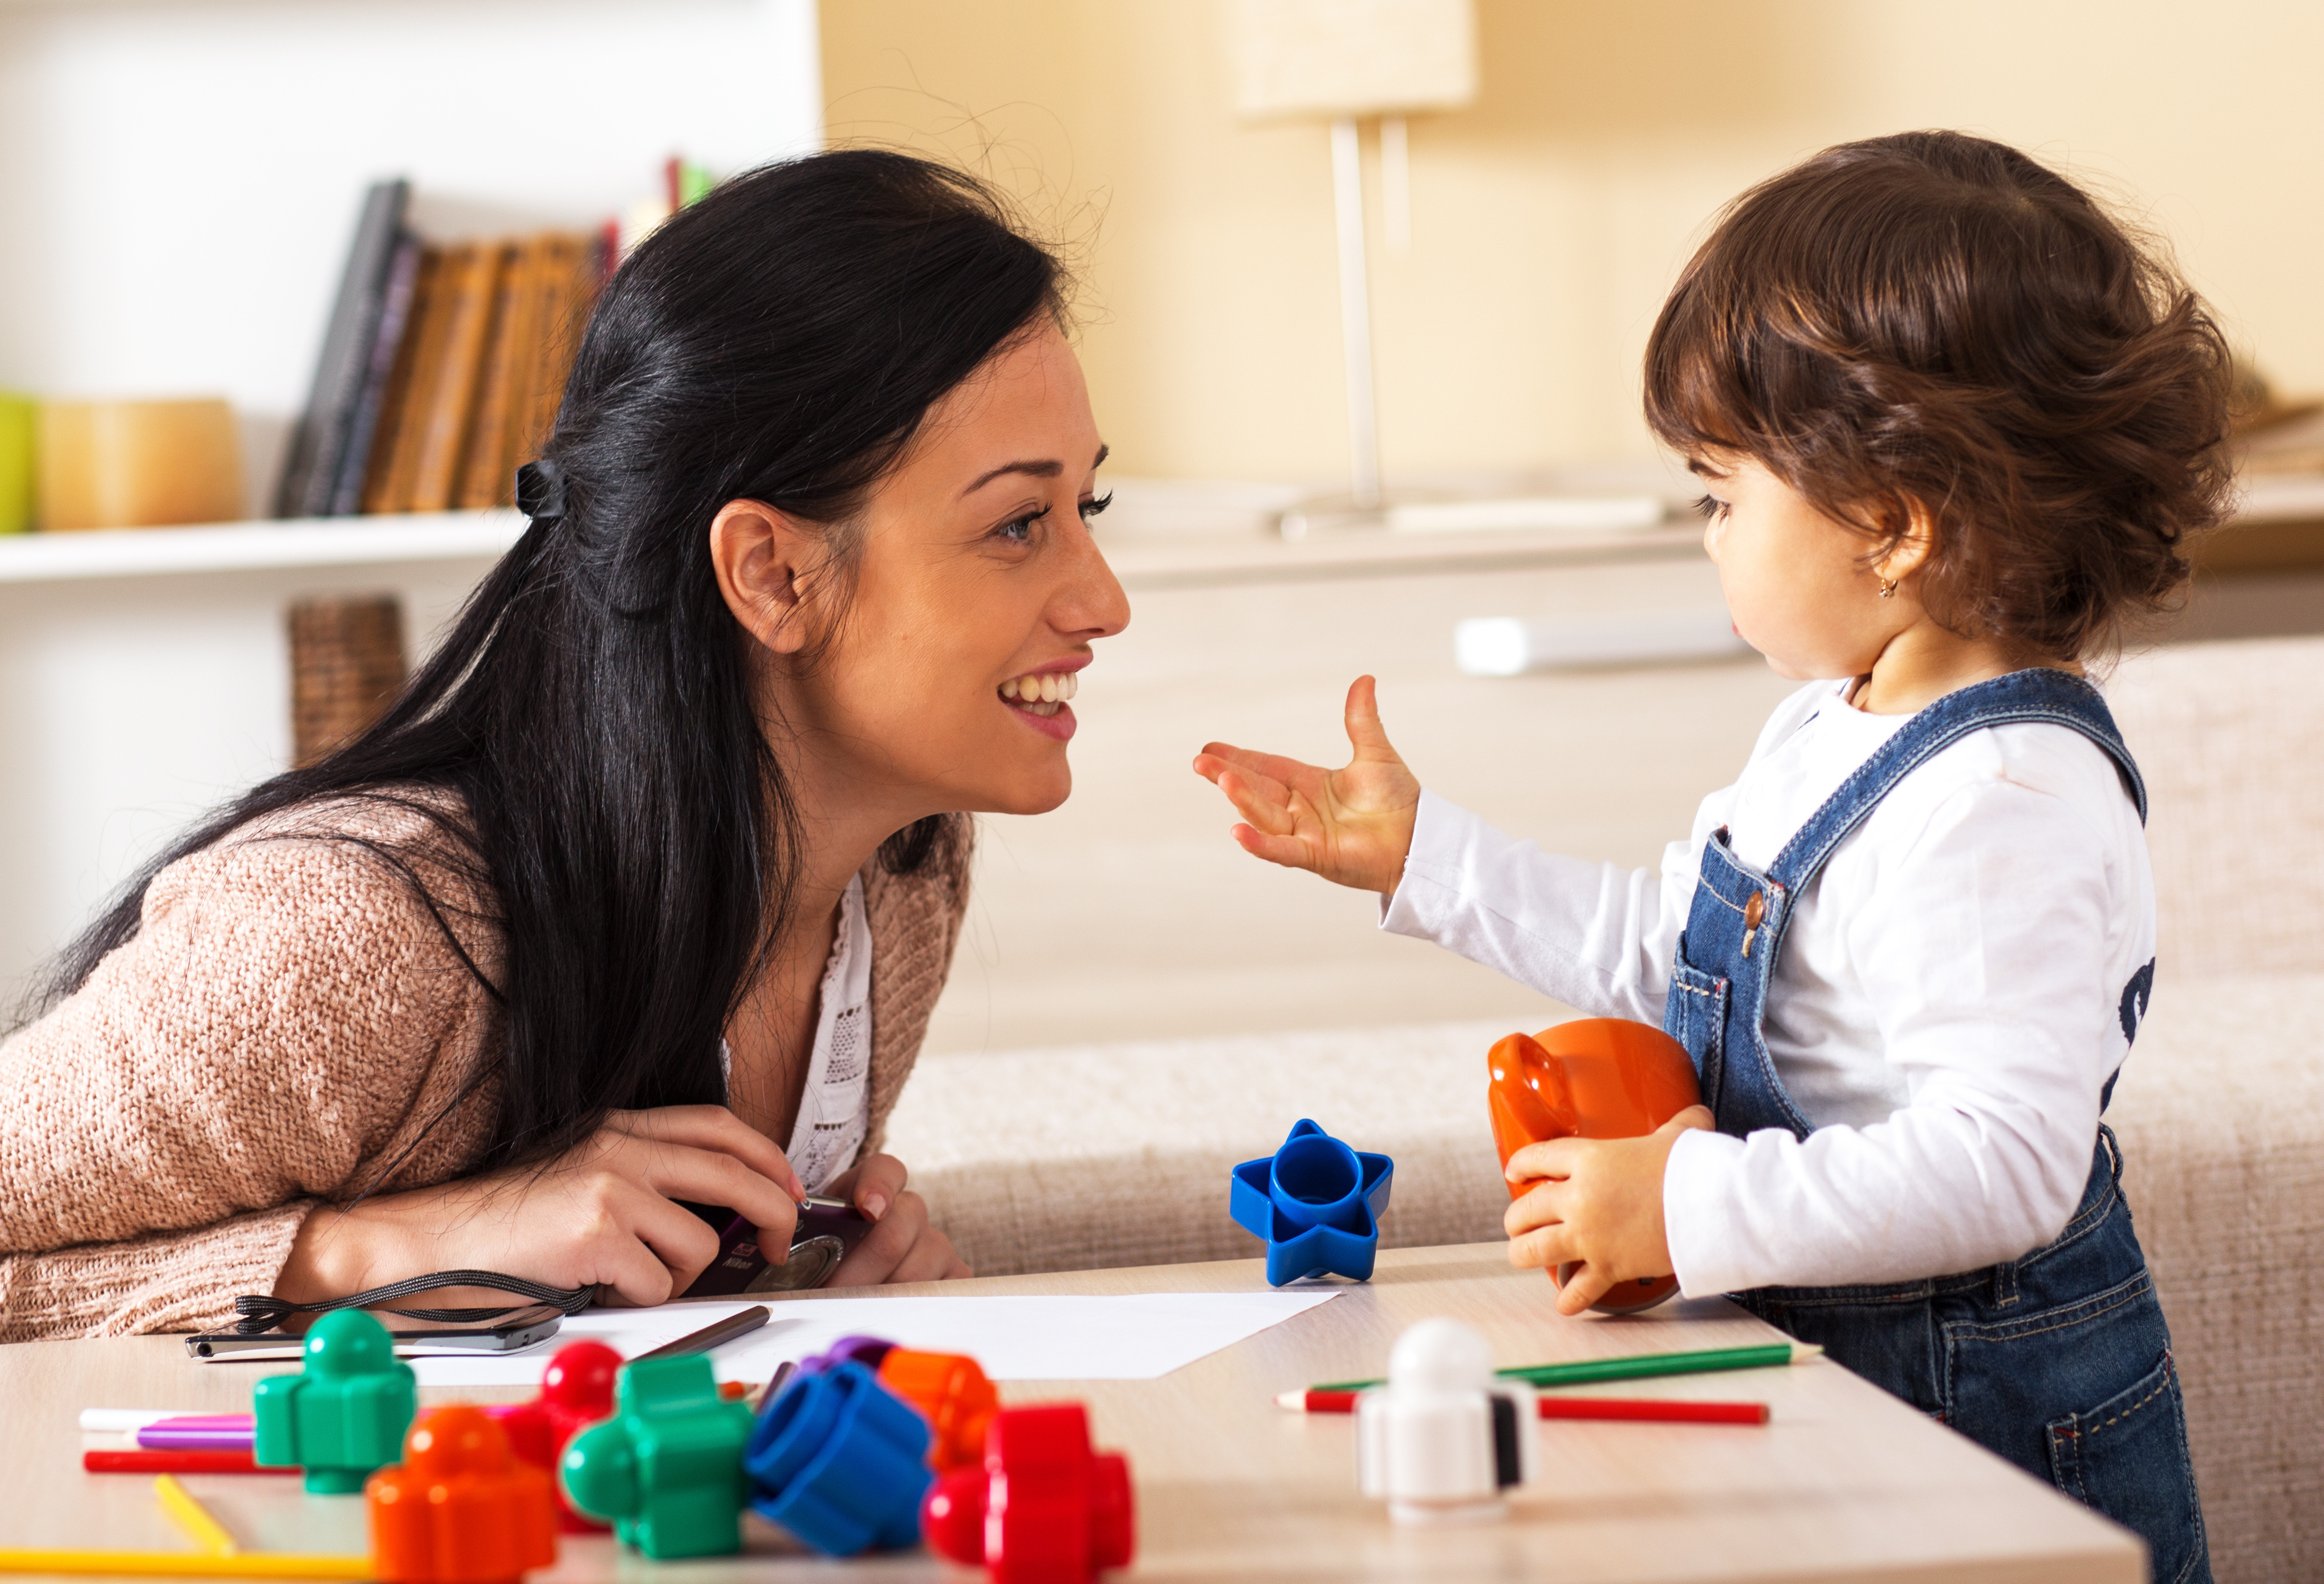 How to Choose a Child Care Provider for Your Family